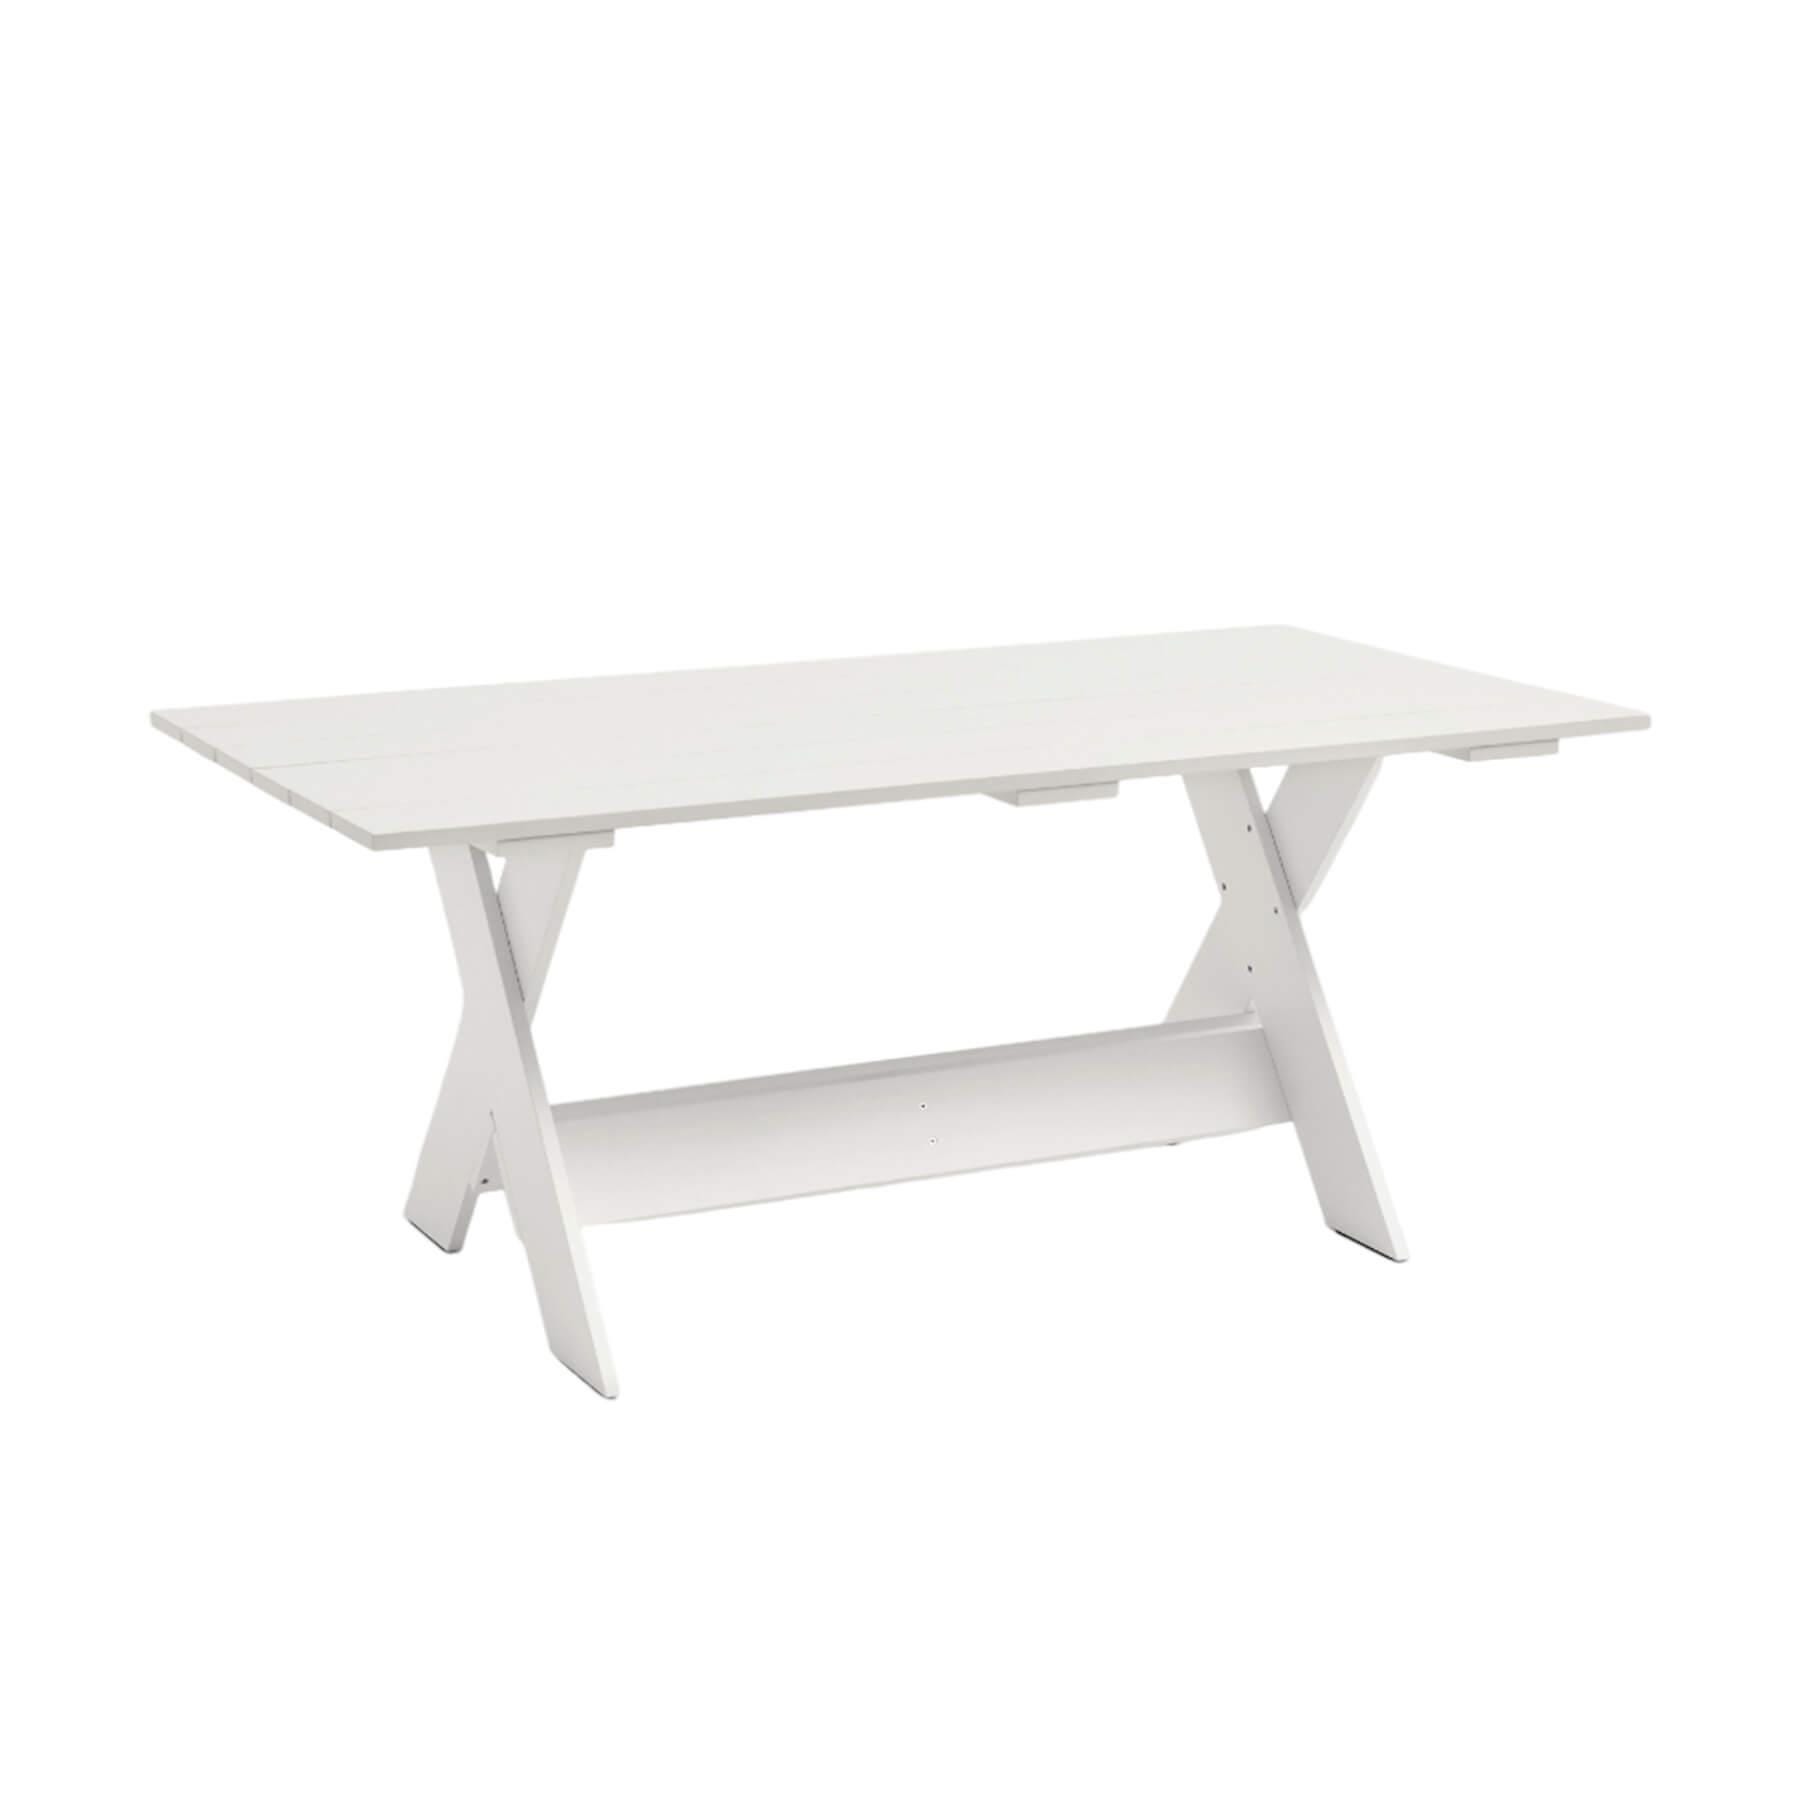 Hay Crate Dining Table 180 X 89 White Designer Furniture From Holloways Of Ludlow